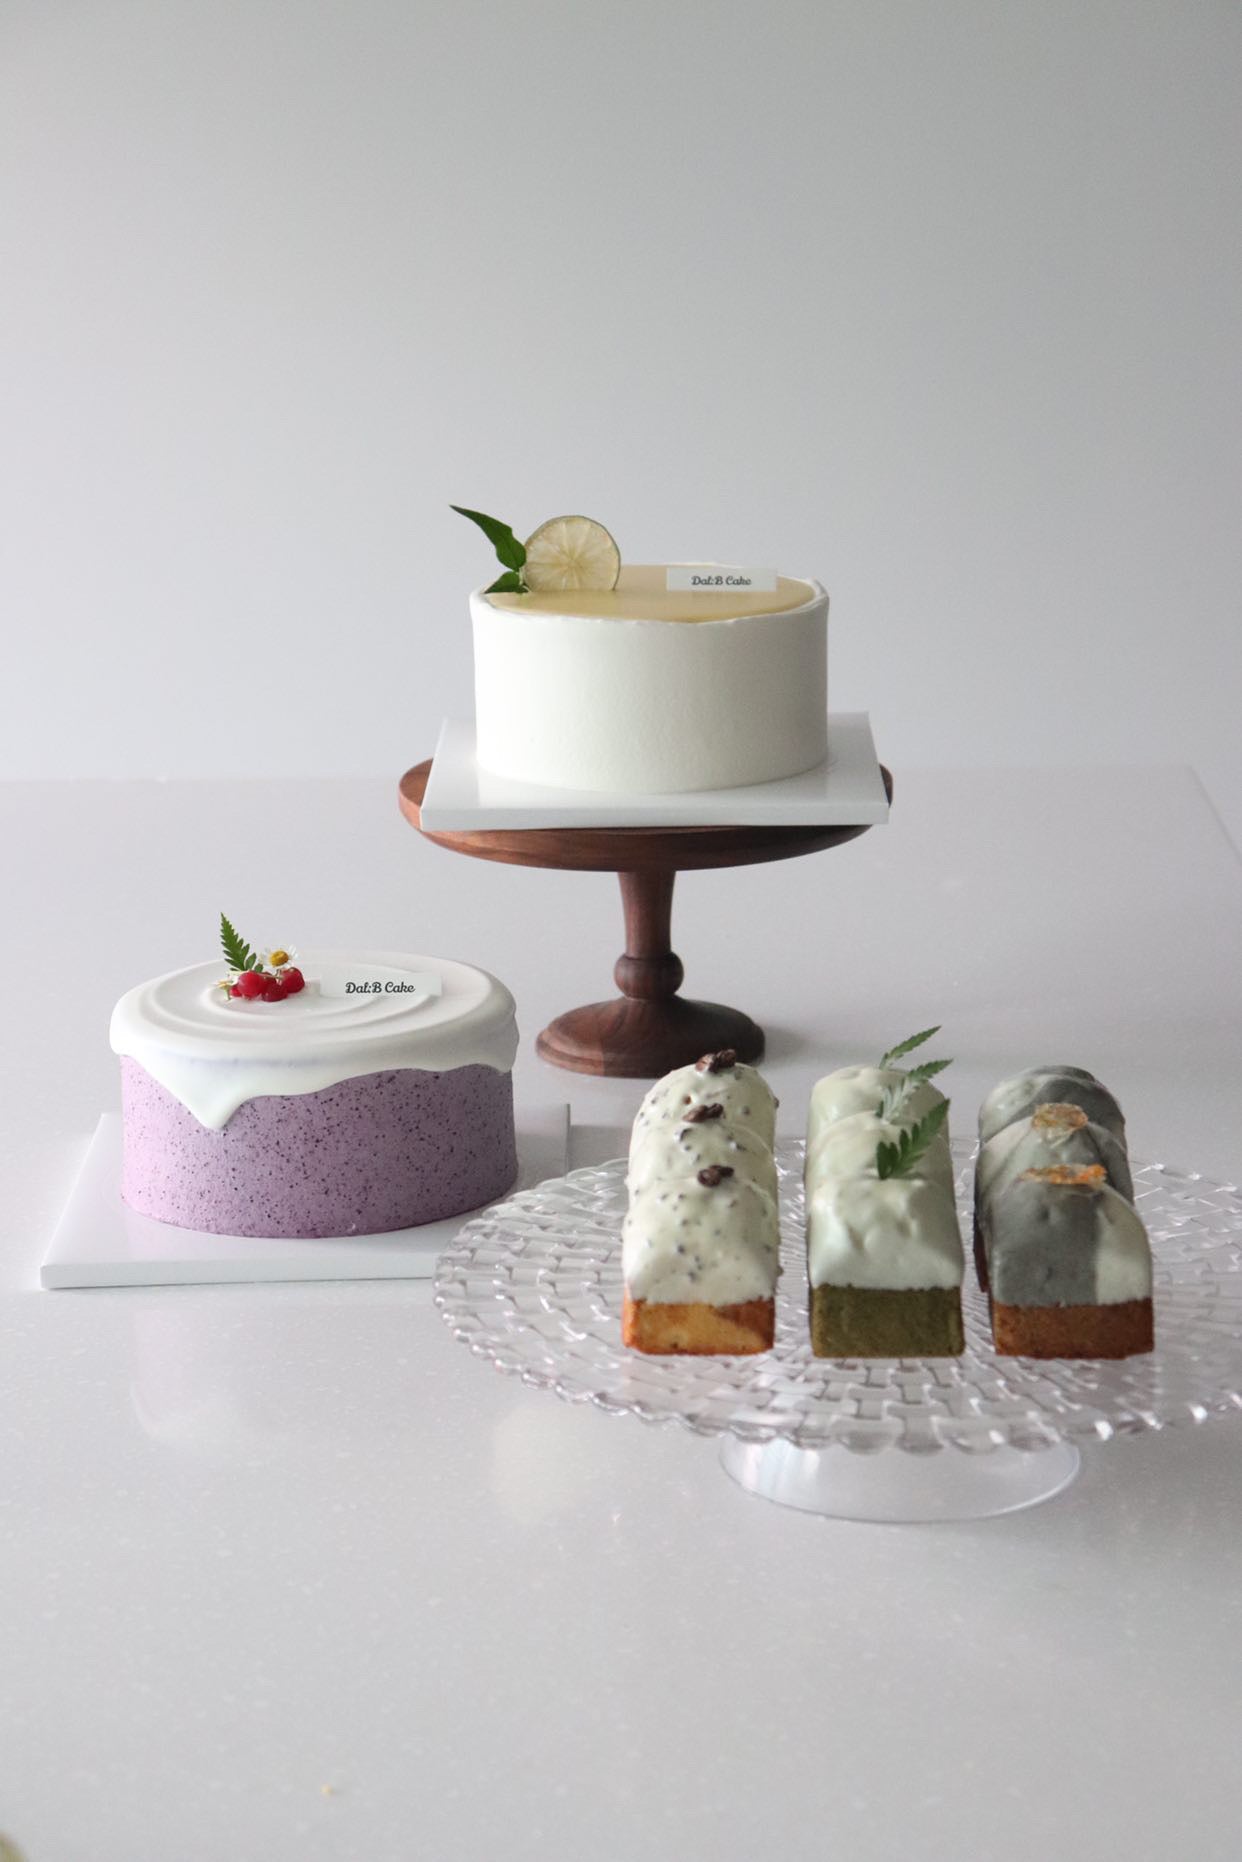 Online Class : Dal B Cake one day class - Blueberry Cake / Lime + Cheese Cake / Cube Pound Cake 3 Flavors